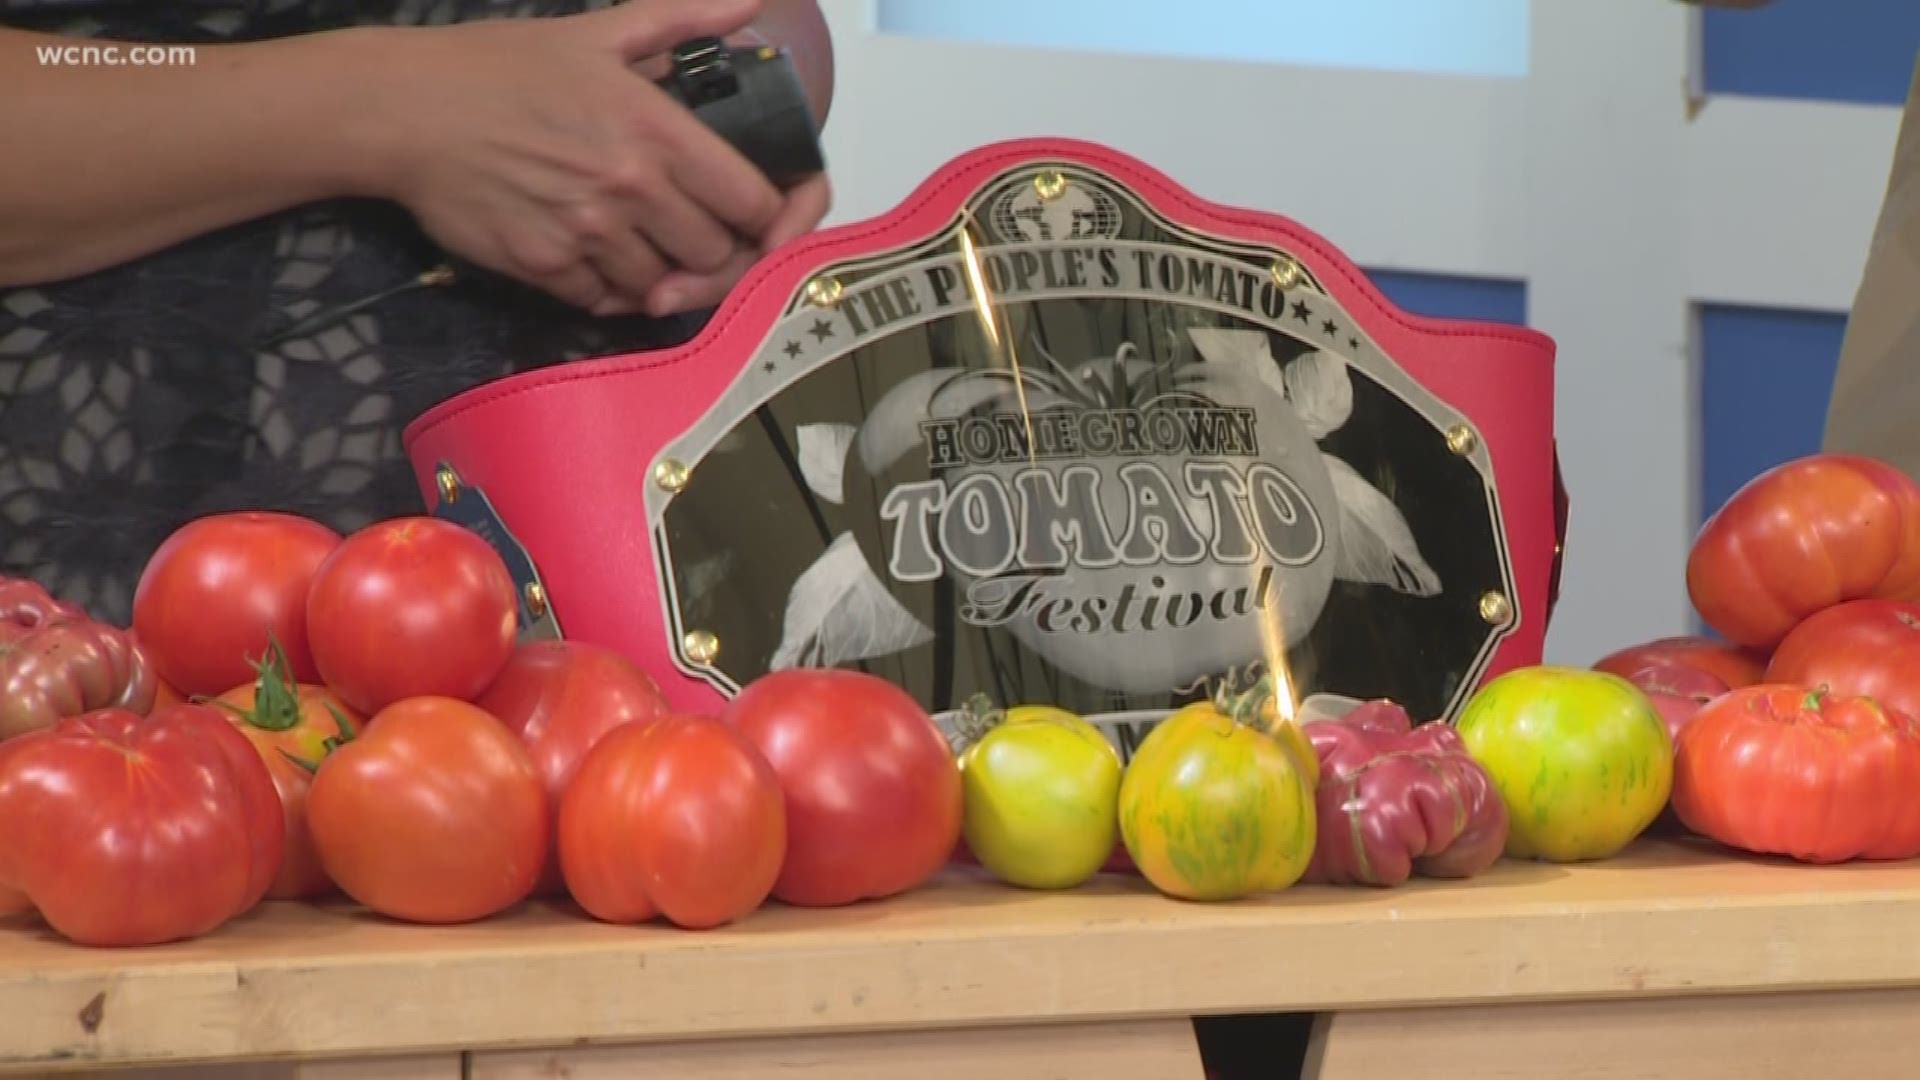 Find out how you can participate in the tomato and cocktail competition